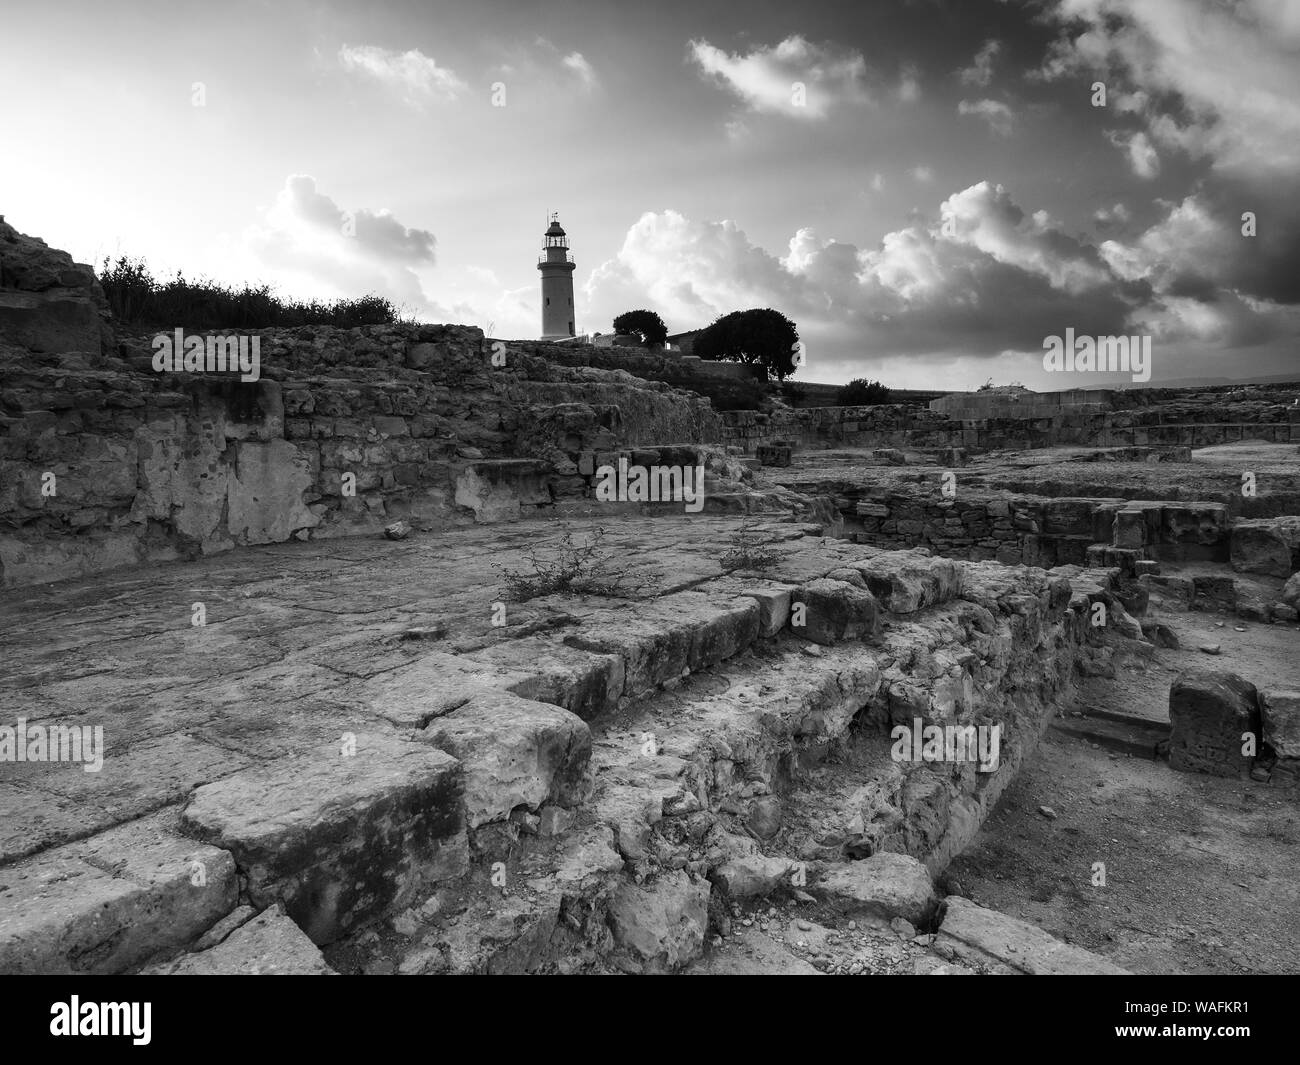 Ancient Ruins Of Kato Pafos, Paphos City, Cyprus Stock Photo